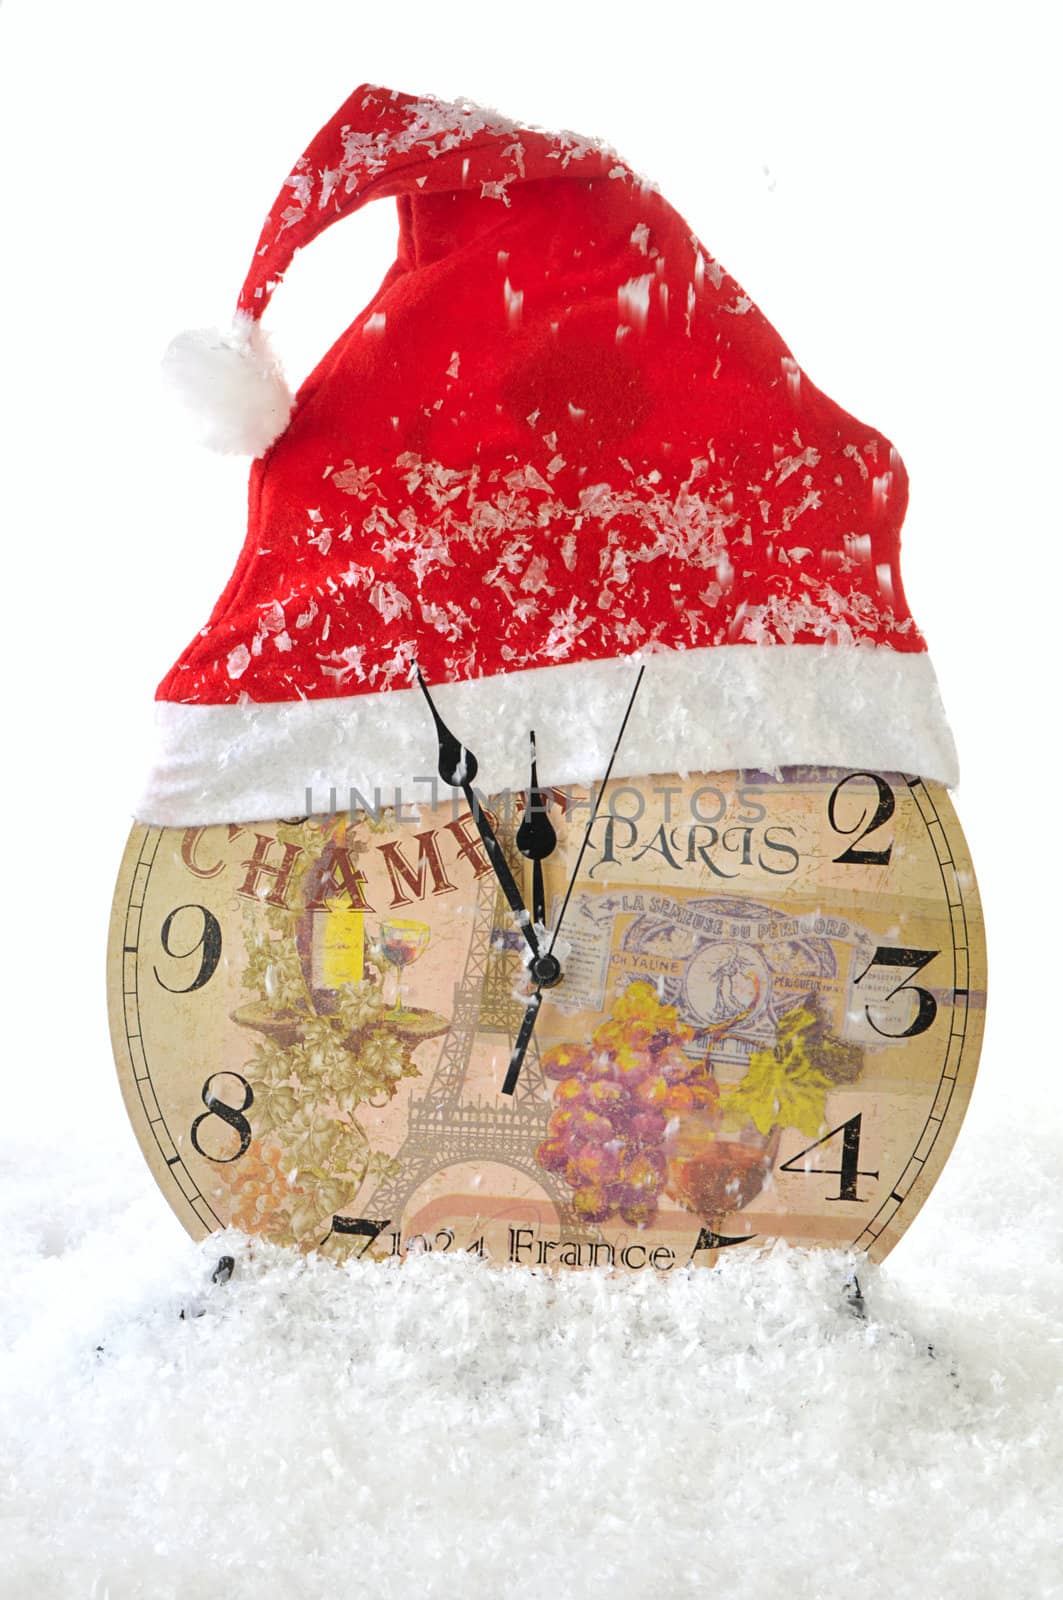 Clock in the hat of Santa Claus on a white snow background